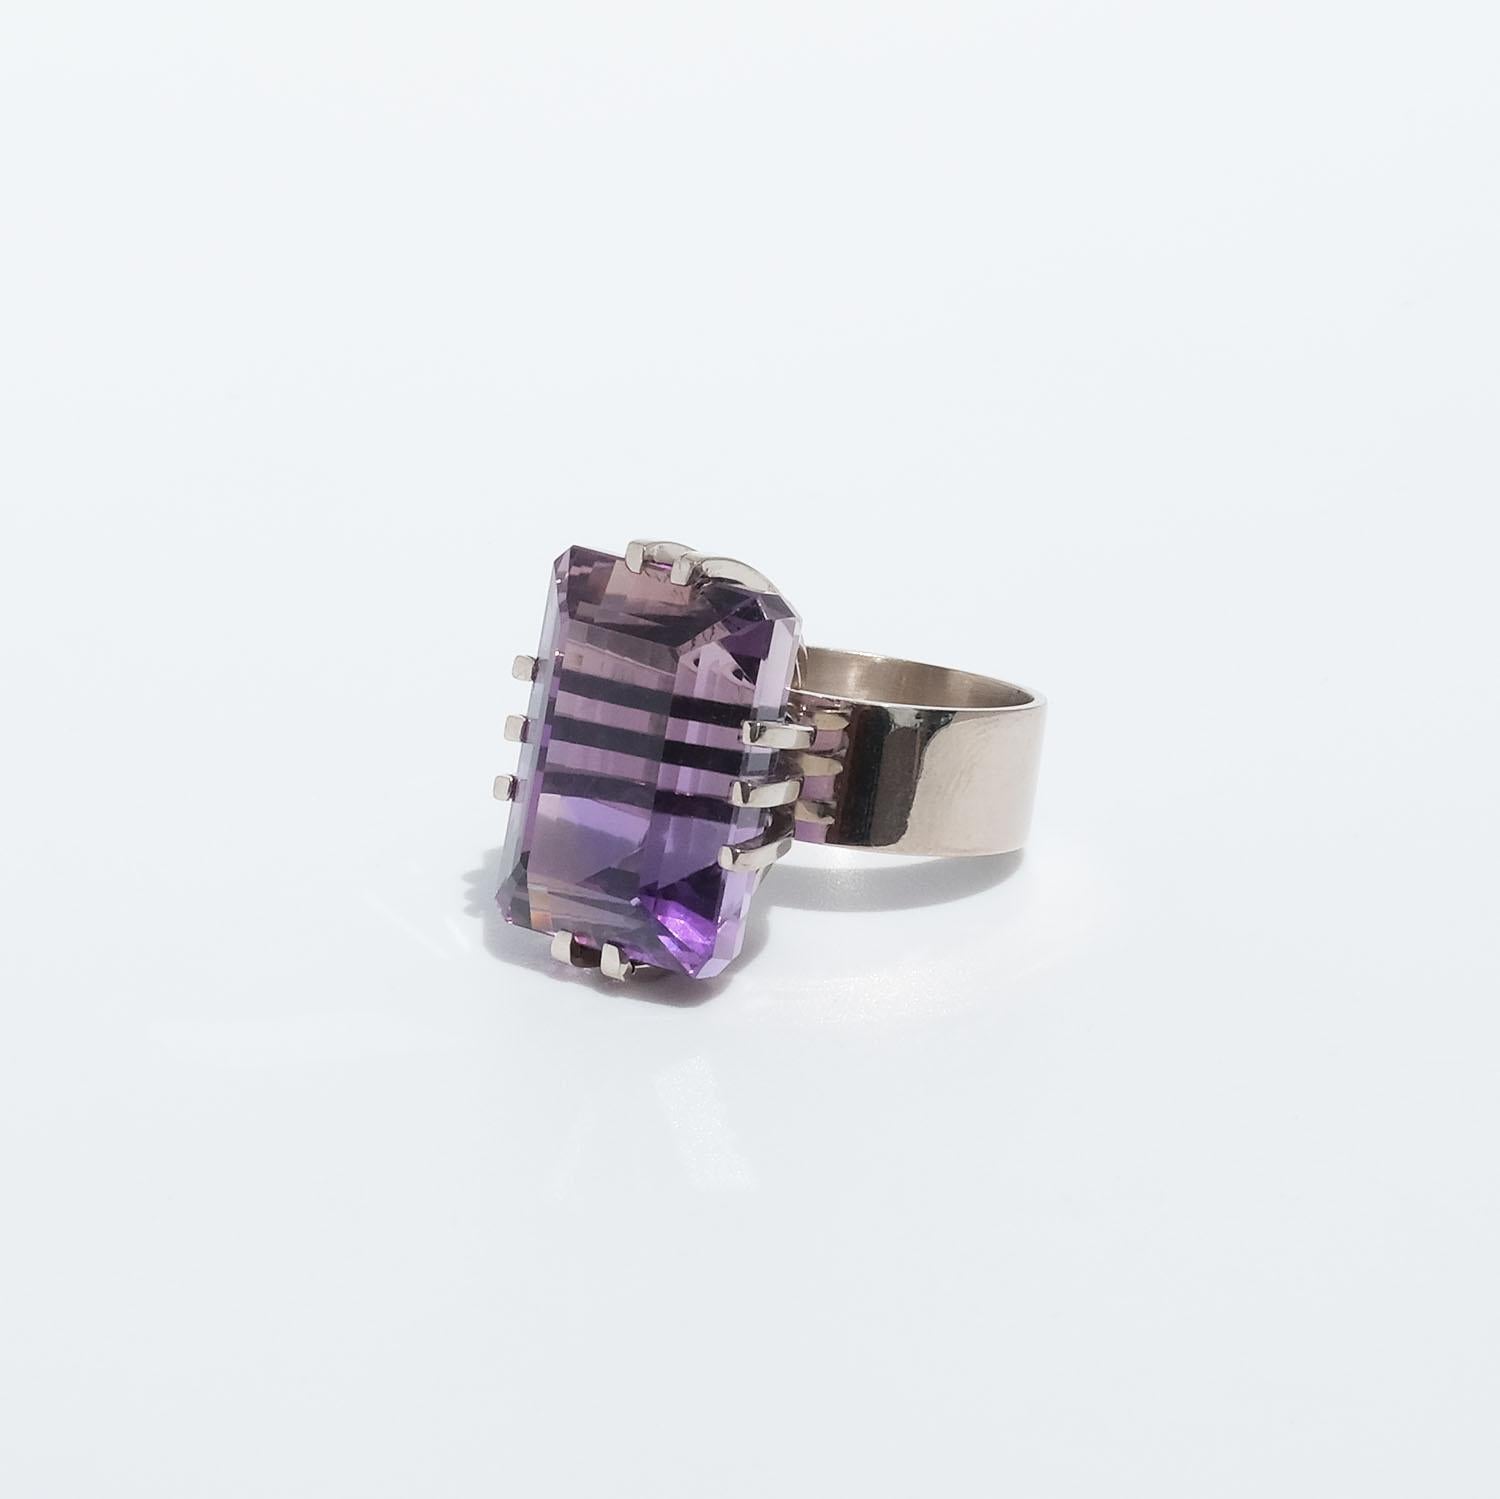 This 18 karat white gold ring is adorned with a rectangular, faceted amethyst that has a deep purple tone. The ten prongs holding the amethyst are prominent and the shank of the ring is beautifully wide and creates a strength in the appearance of